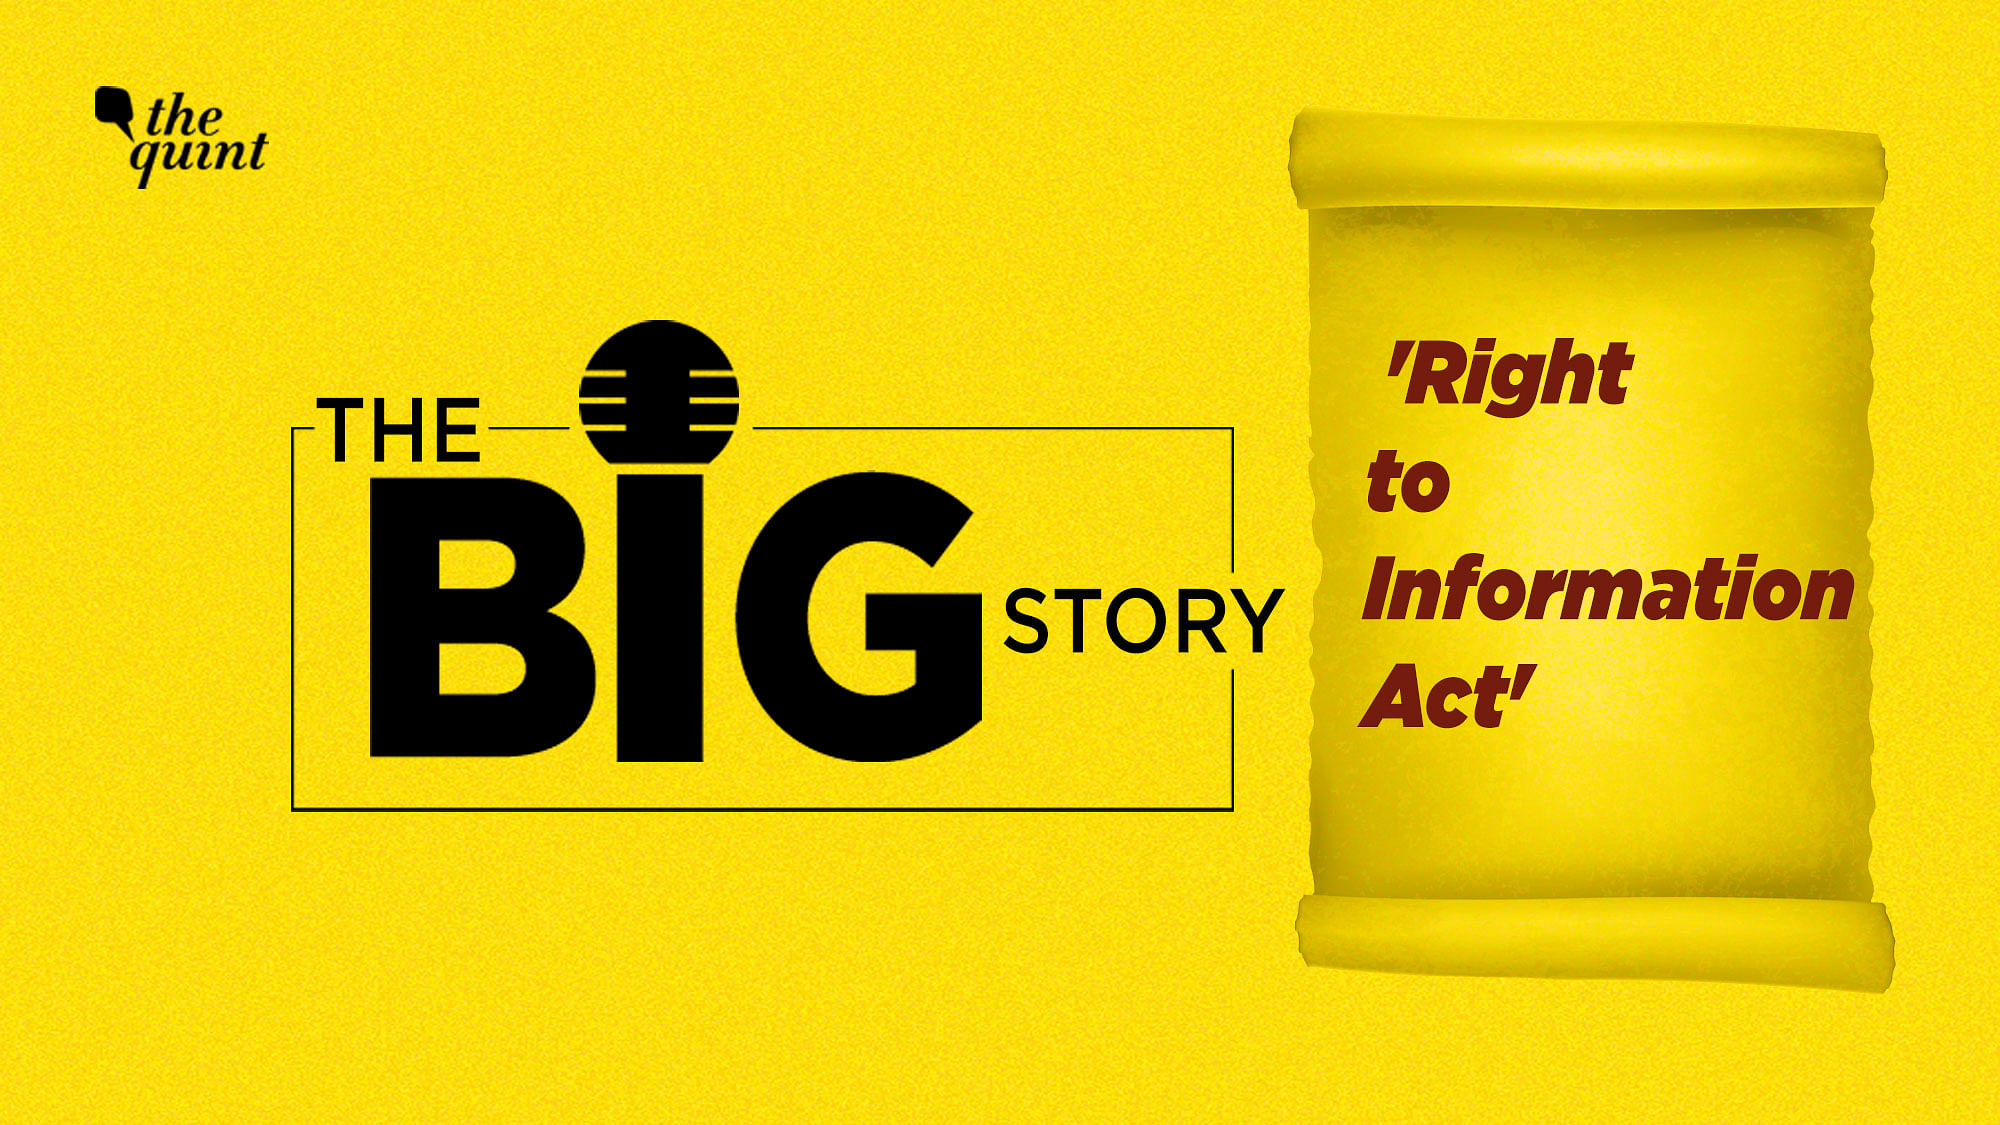 The Right to Information (Amendment) Bill, 2019 was passed in the Lok Sabha last week